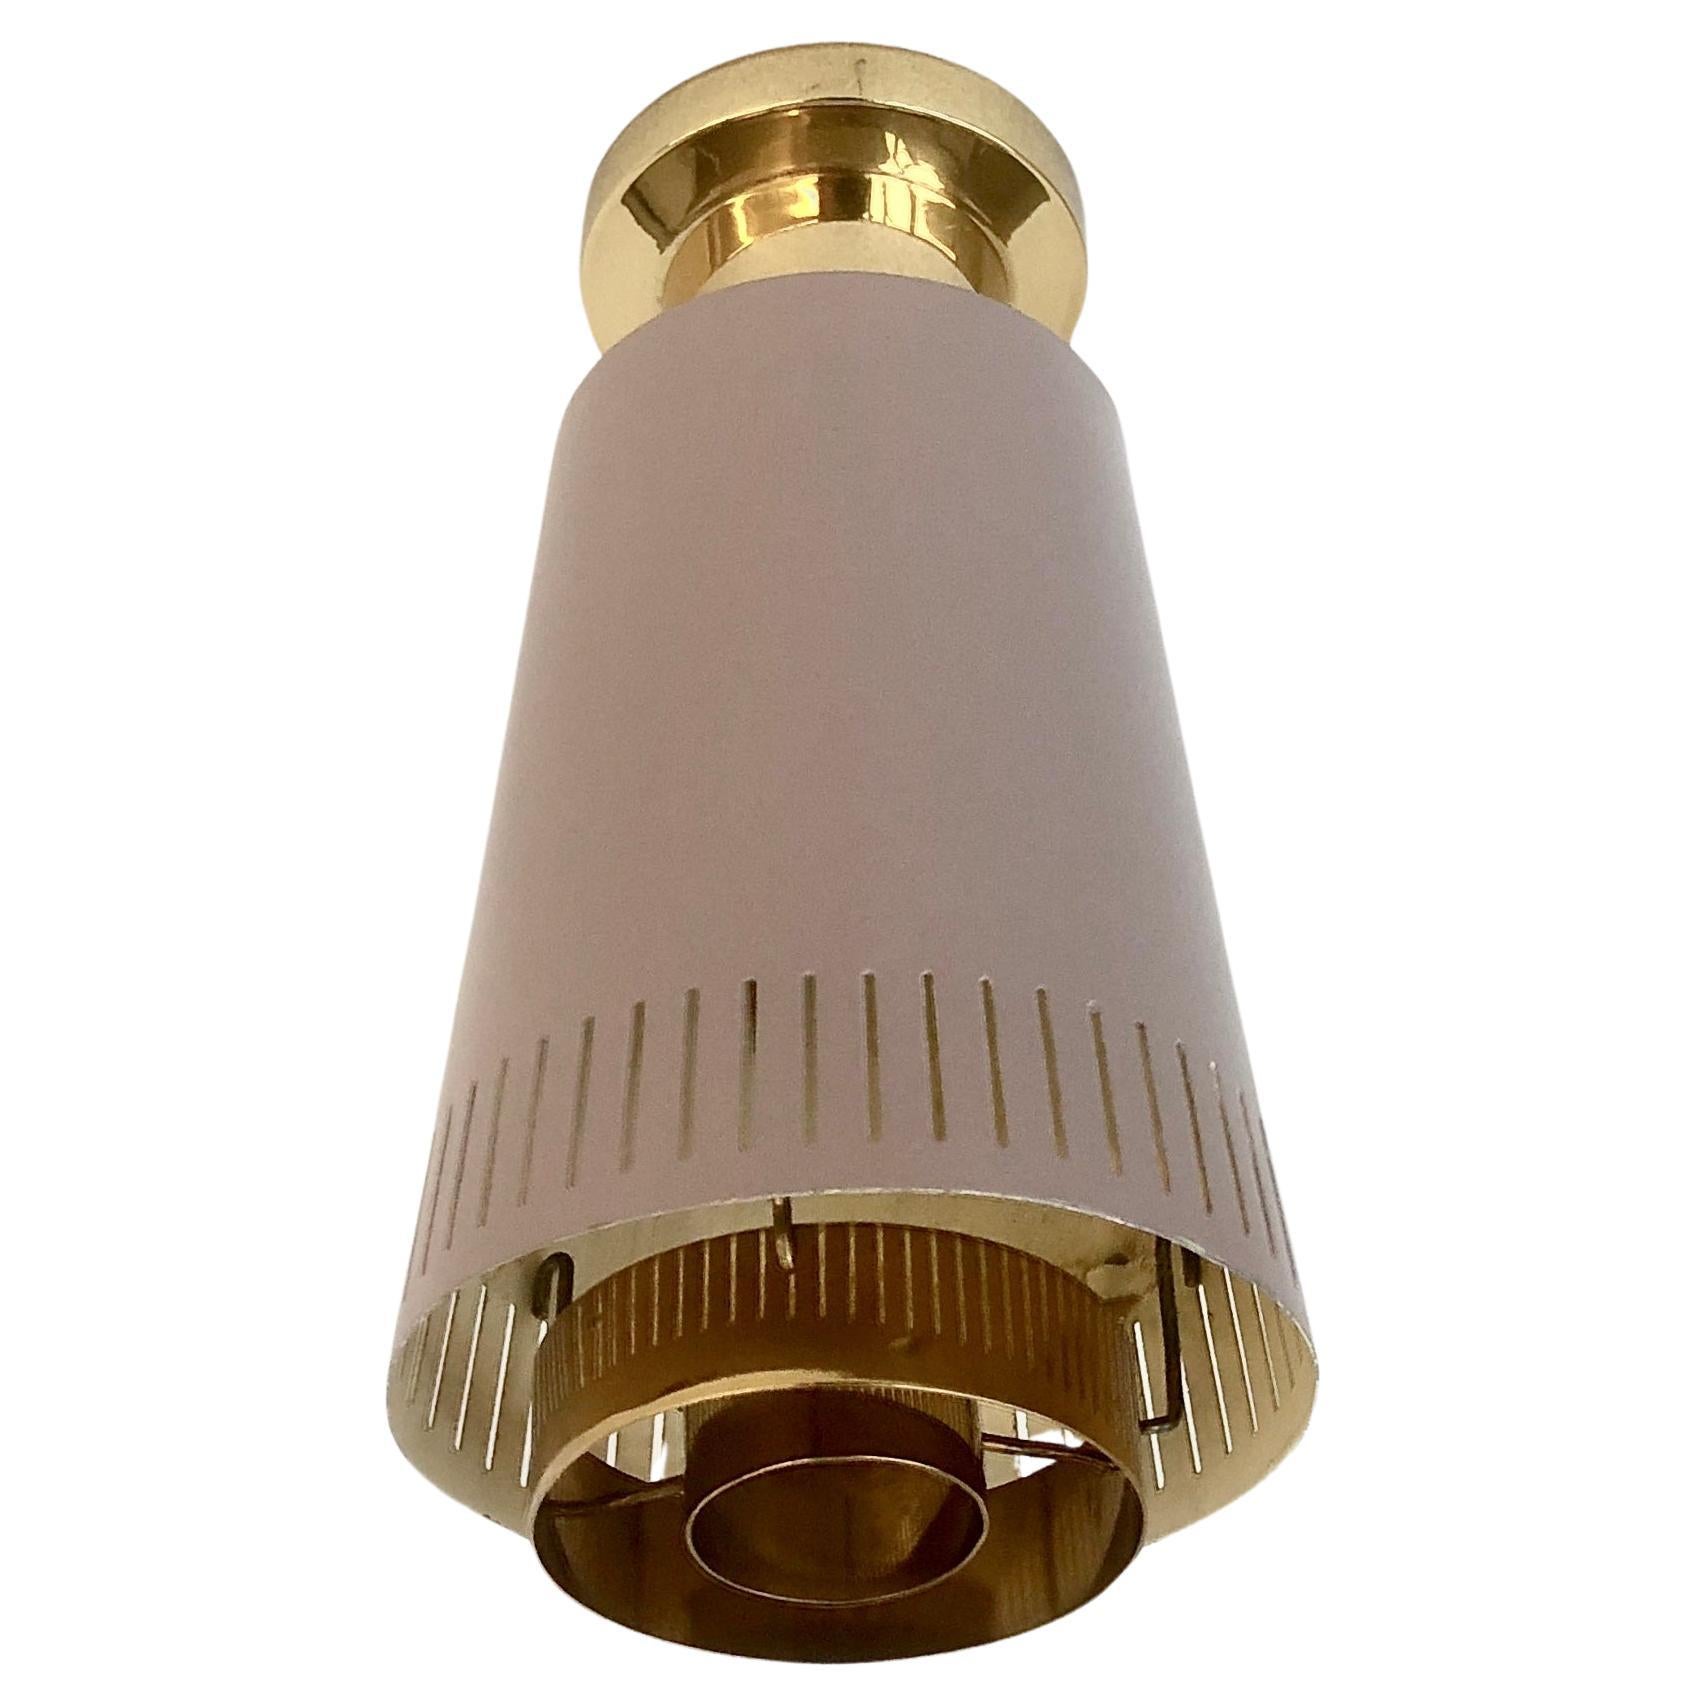 Ceiling light by Paavo Tynell, model 9067